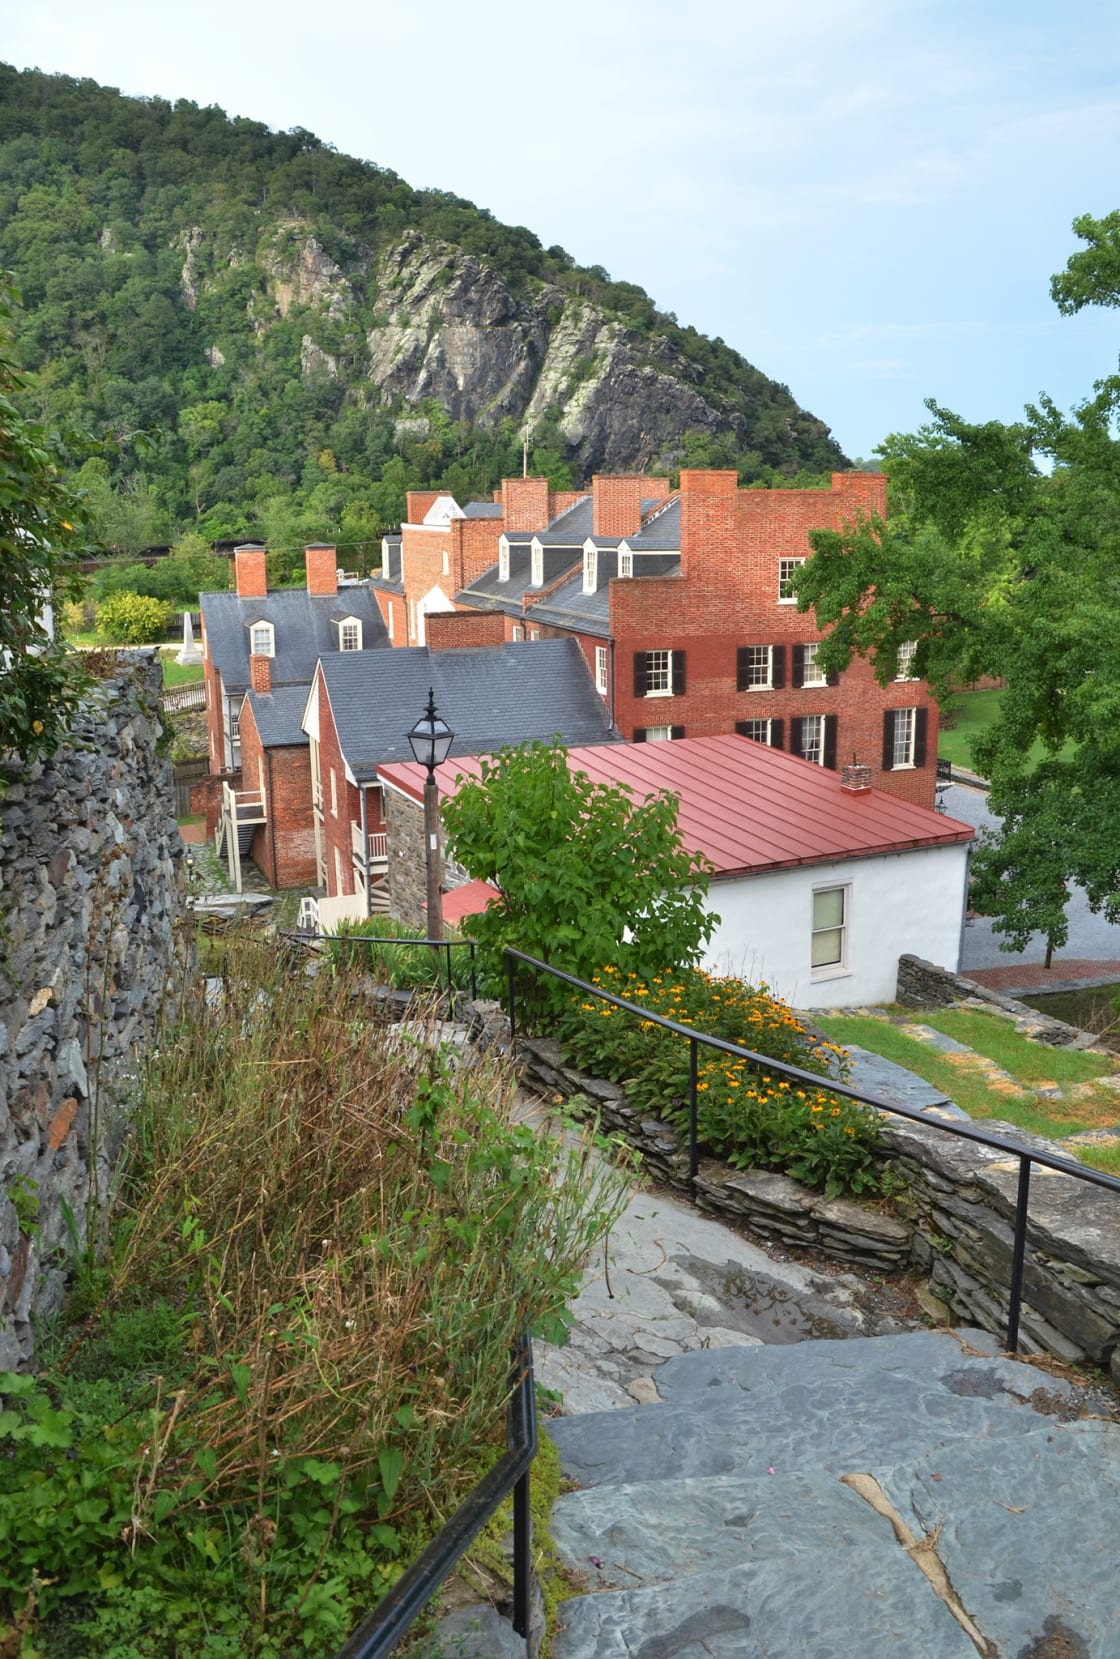 Nearby town of Harpers Ferry is a fun historical town for Civil War and John Brown history.